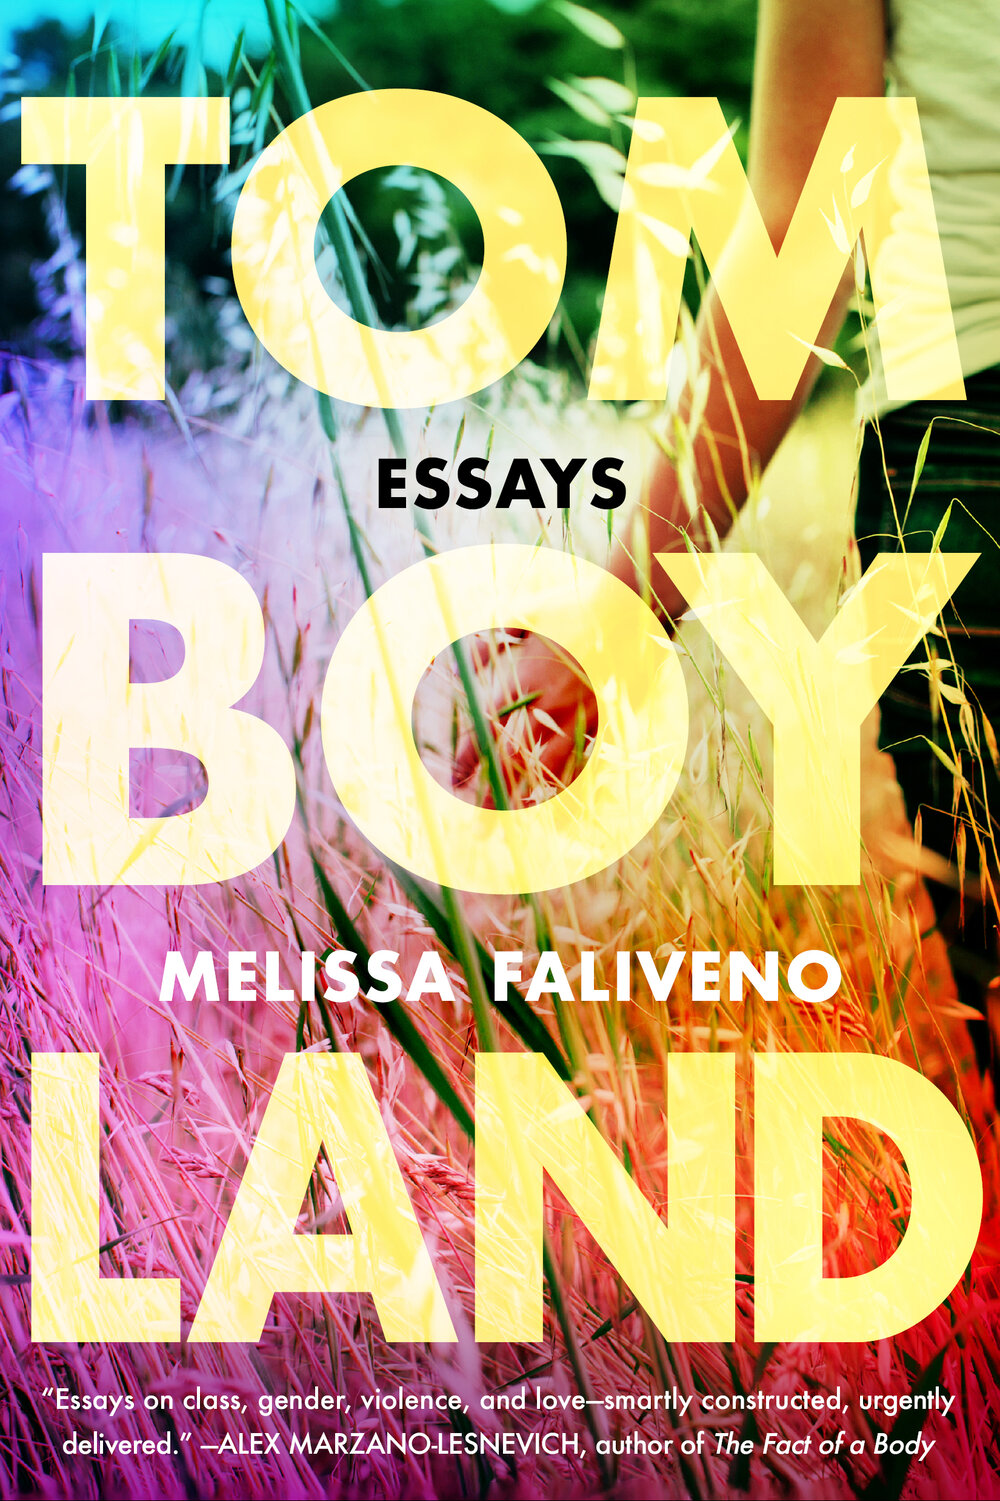 Book cover featuring the words in large font an an out of frame shot of a woman walking in a overgrown field.